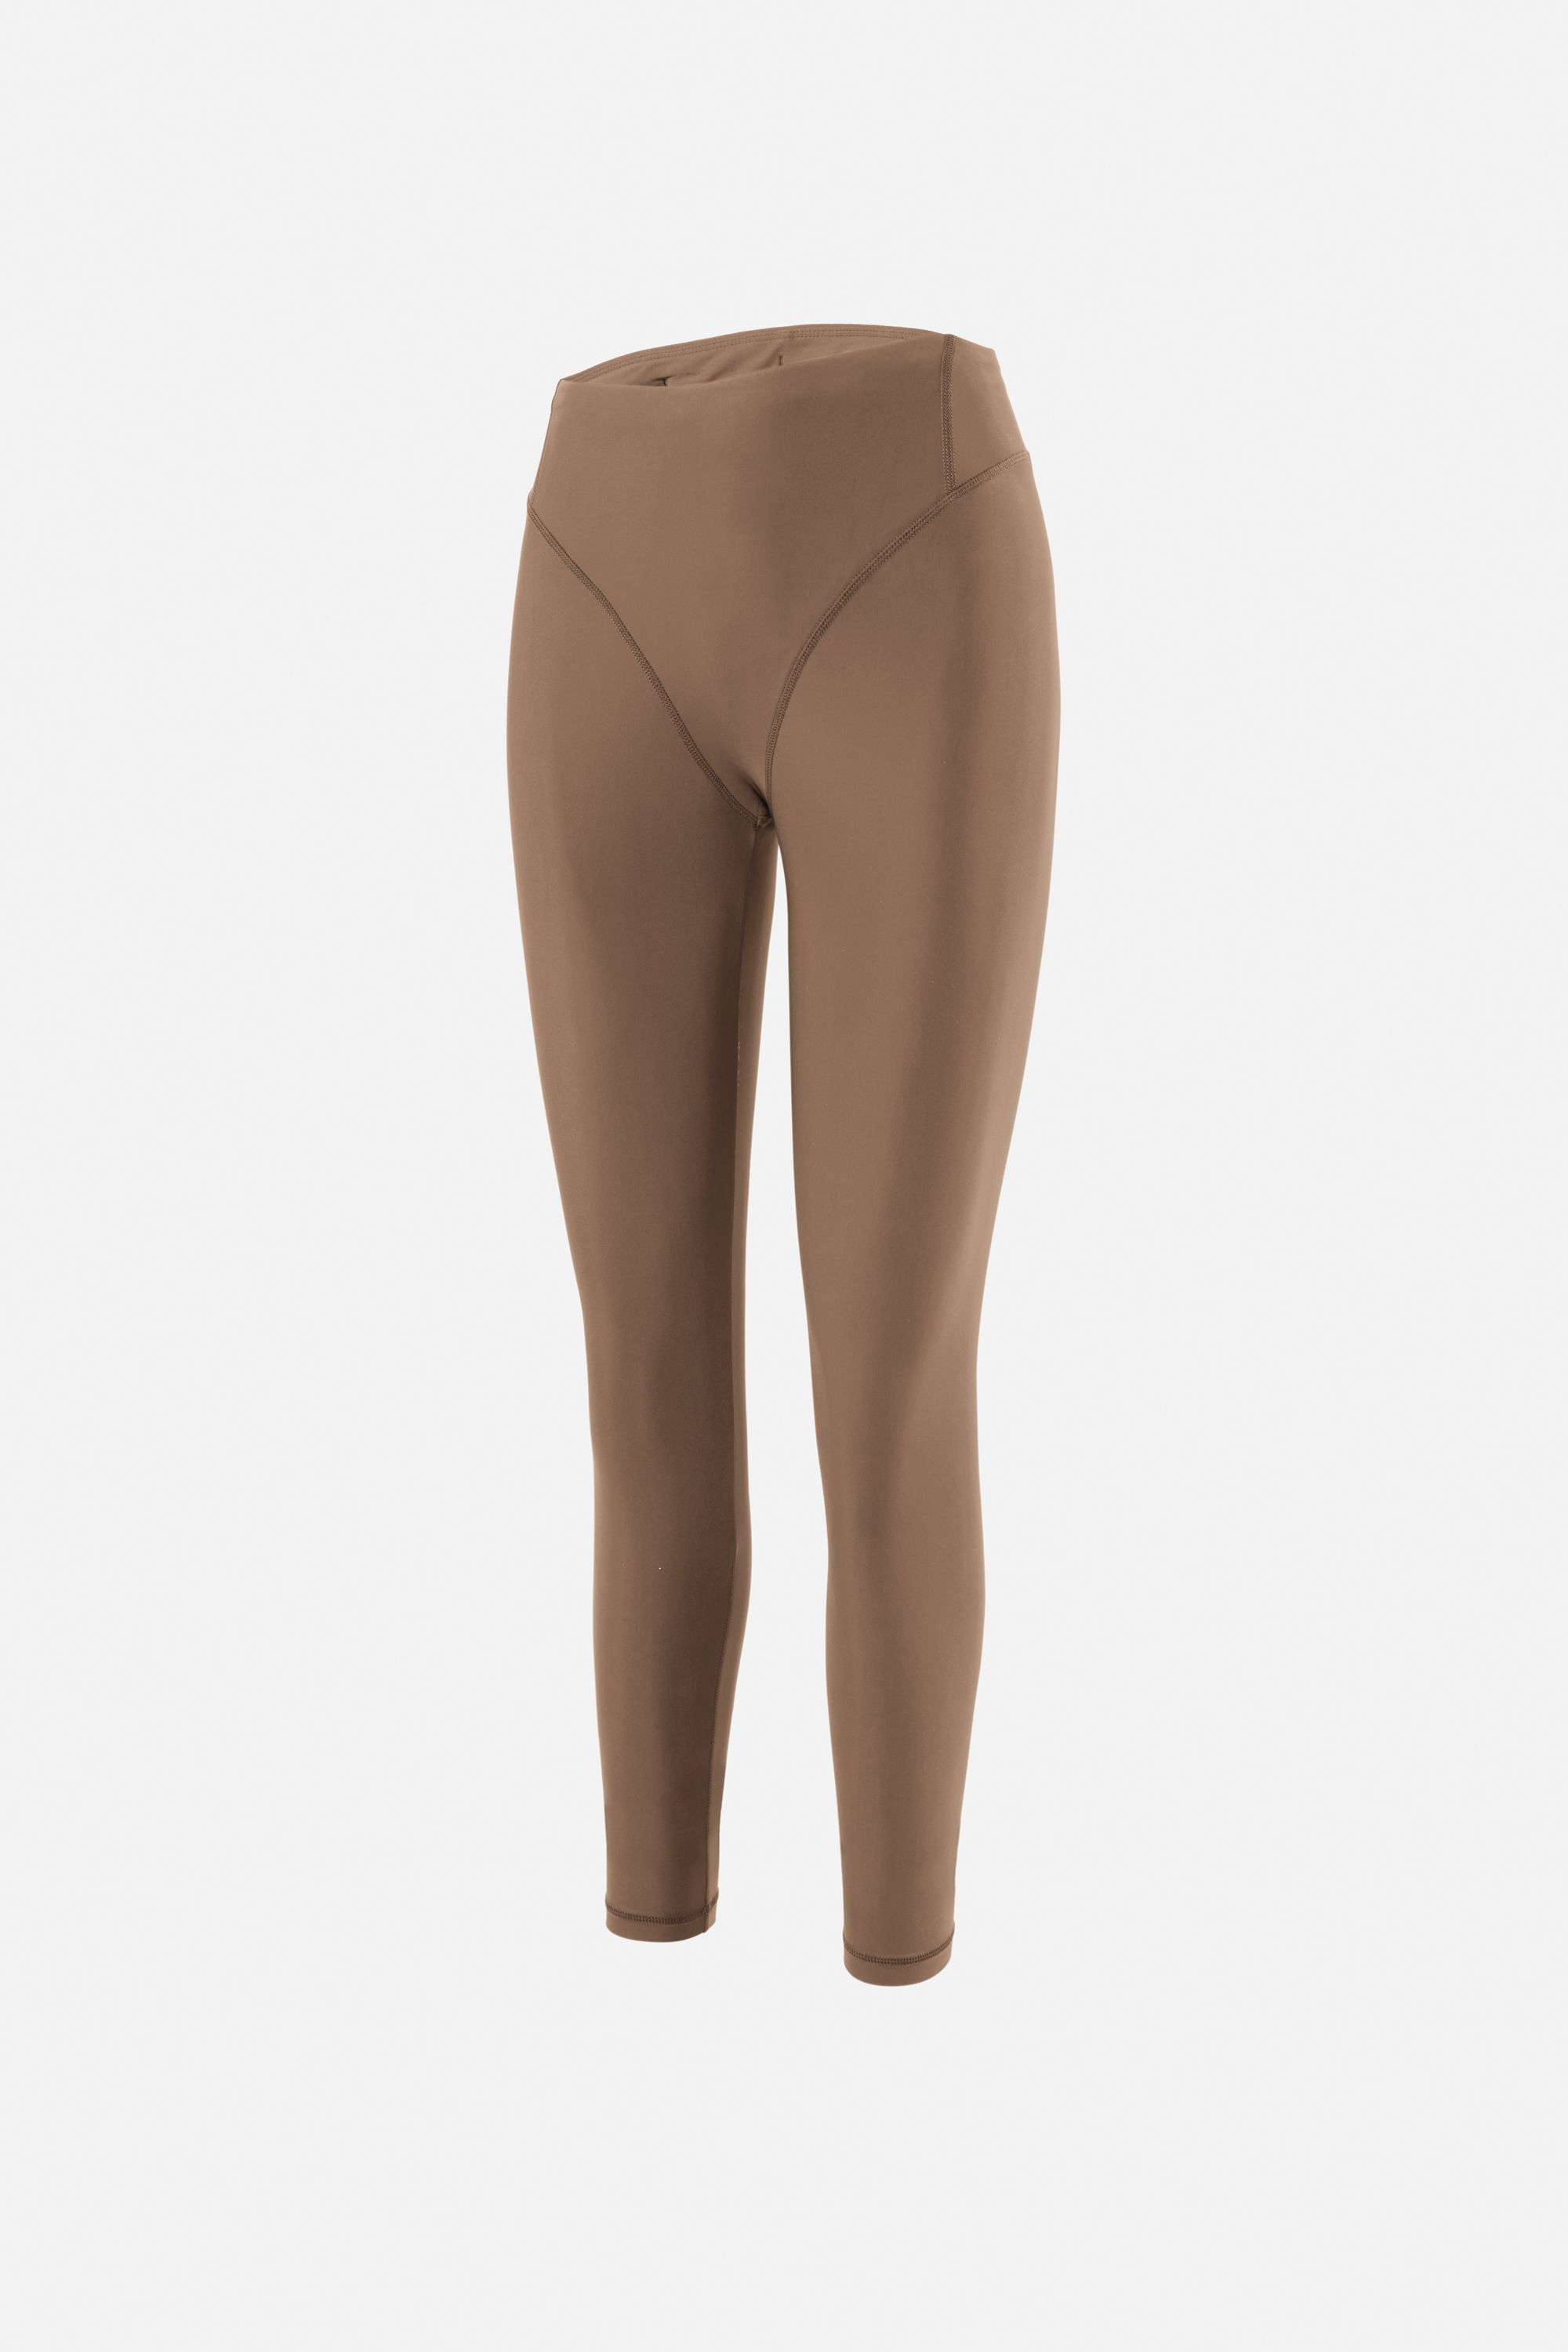 Brown Solid Full Length Casual Women Slim Fit Tights - Selling